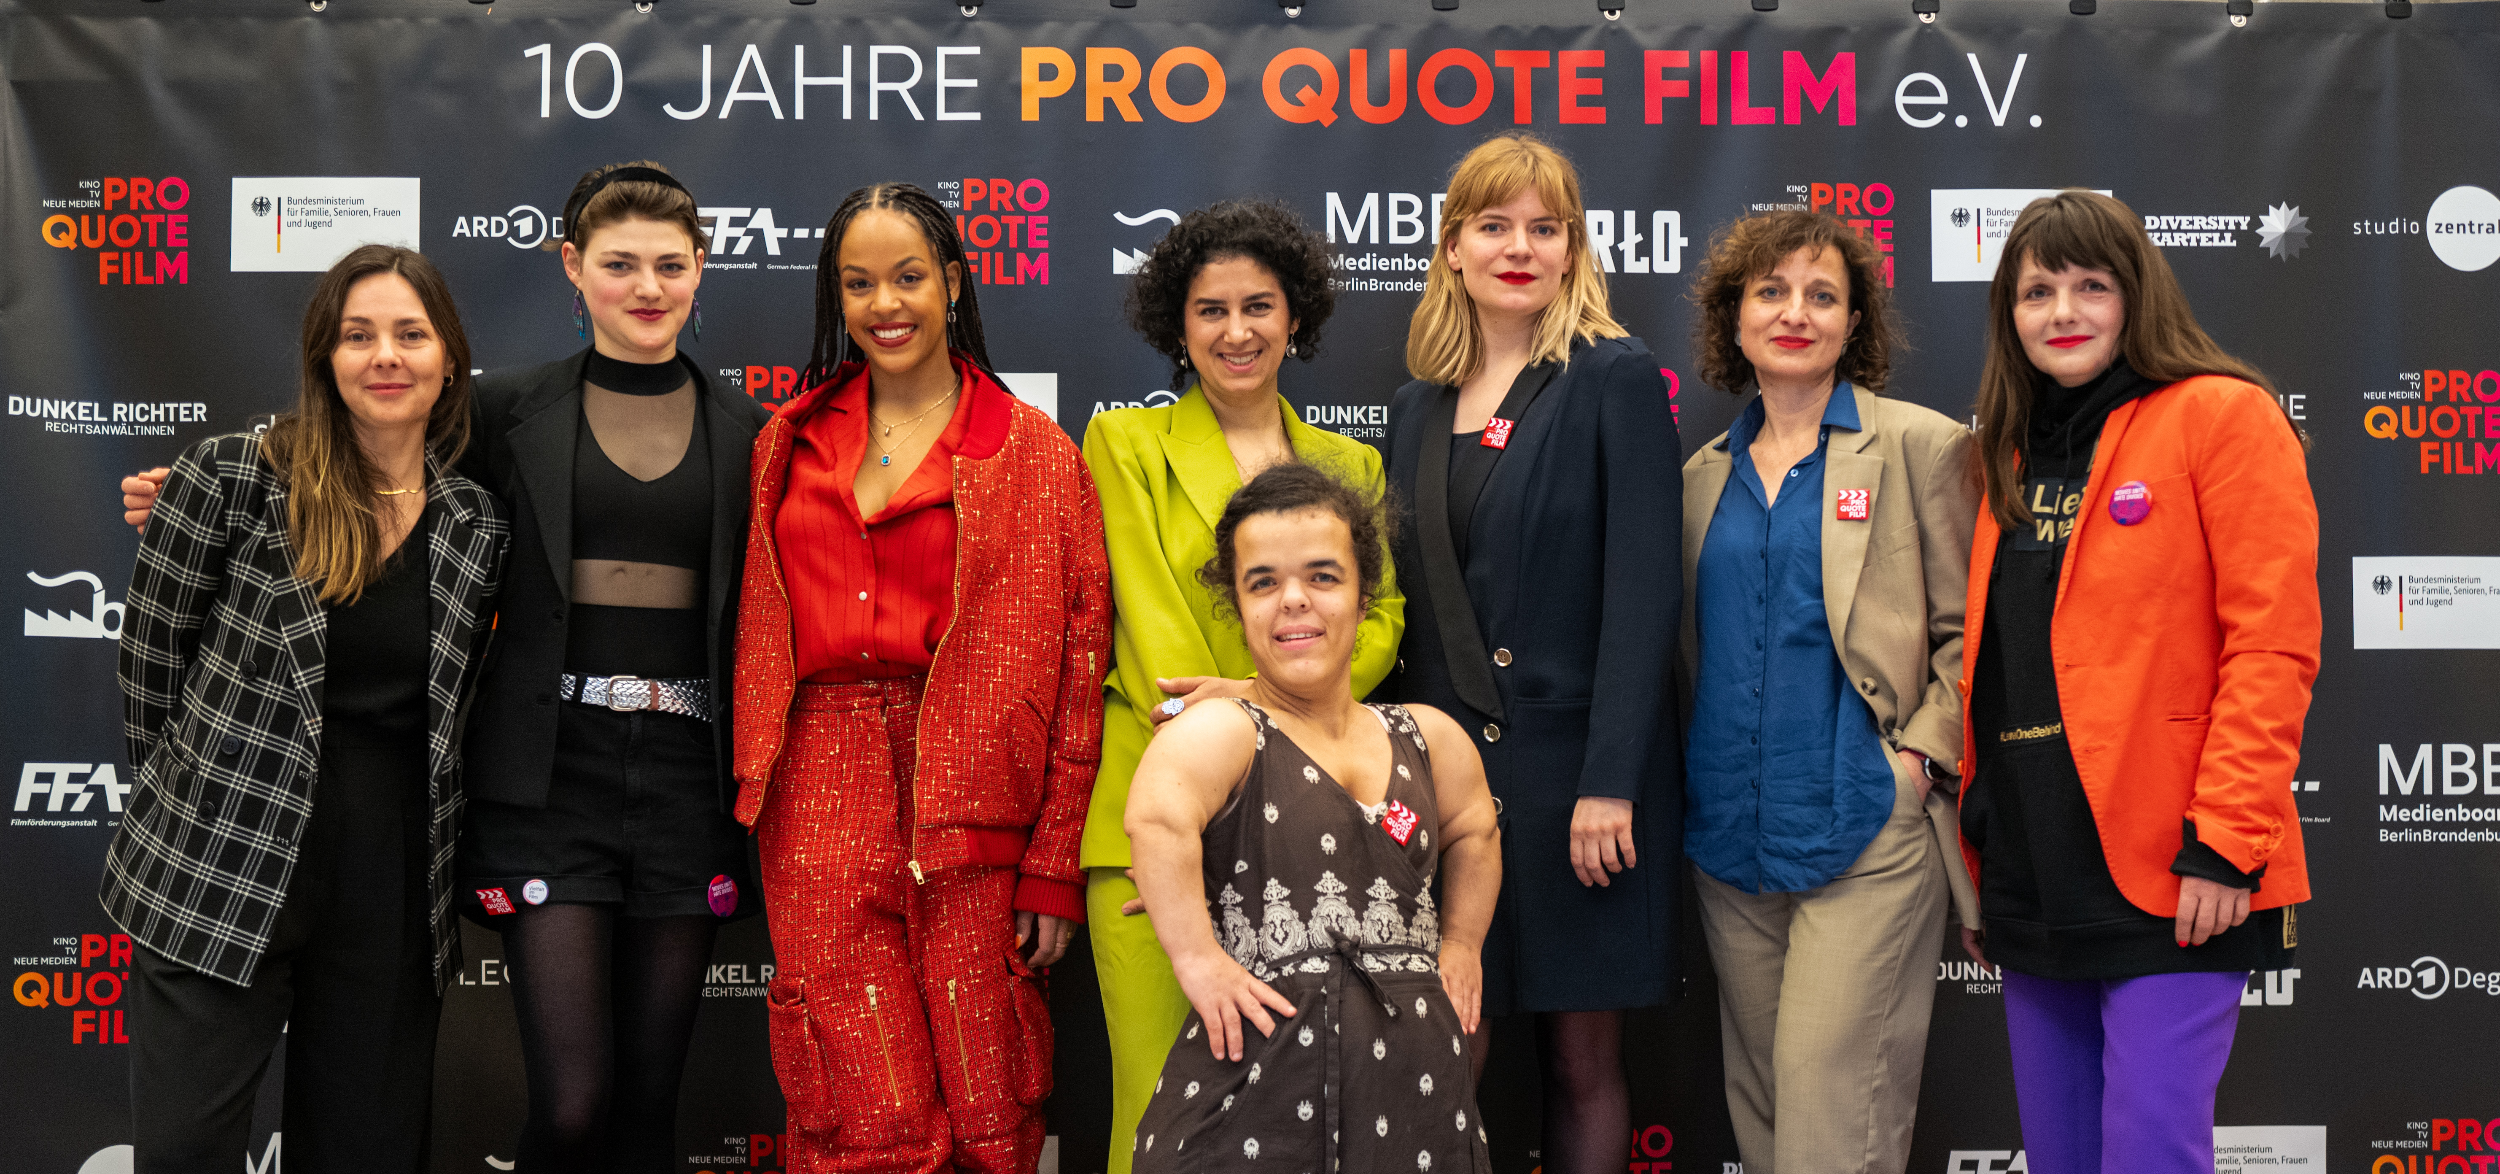 The Magnificent 7 I 10 Jahre Pro Quote Film /Kongress “Empowered for Equality” 1